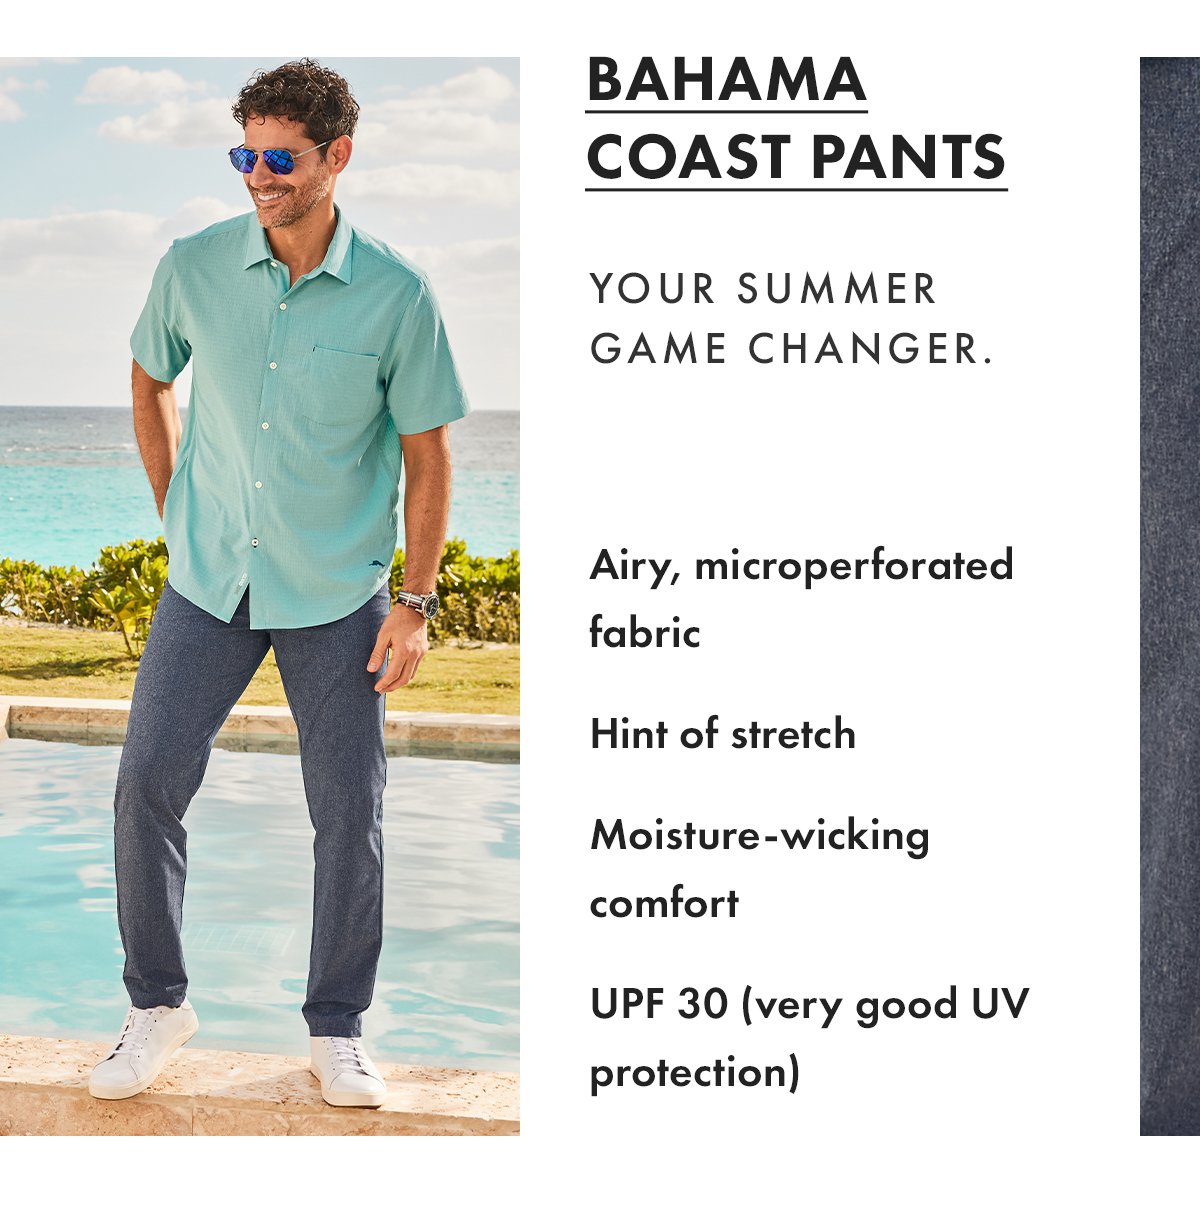 Bahama Coast Pants. Your summer game changer. Airy, microperforated fabric, hint of stretch, moisture-wicking comfort, UPF 30.